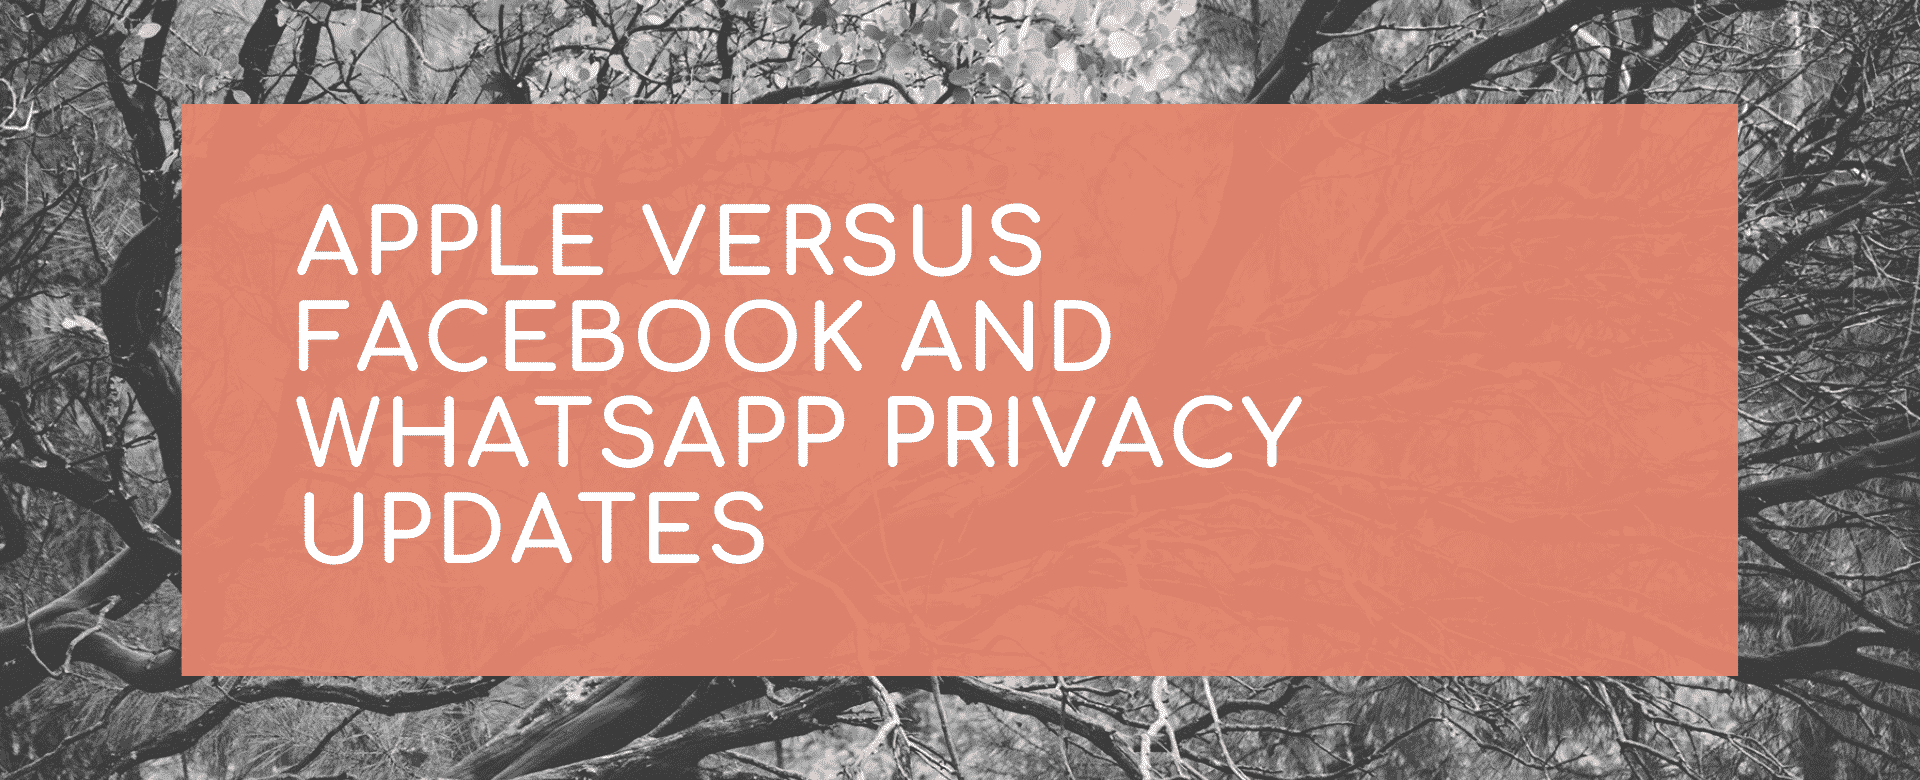 Apple versus Facebook and WhatsApp privacy updates